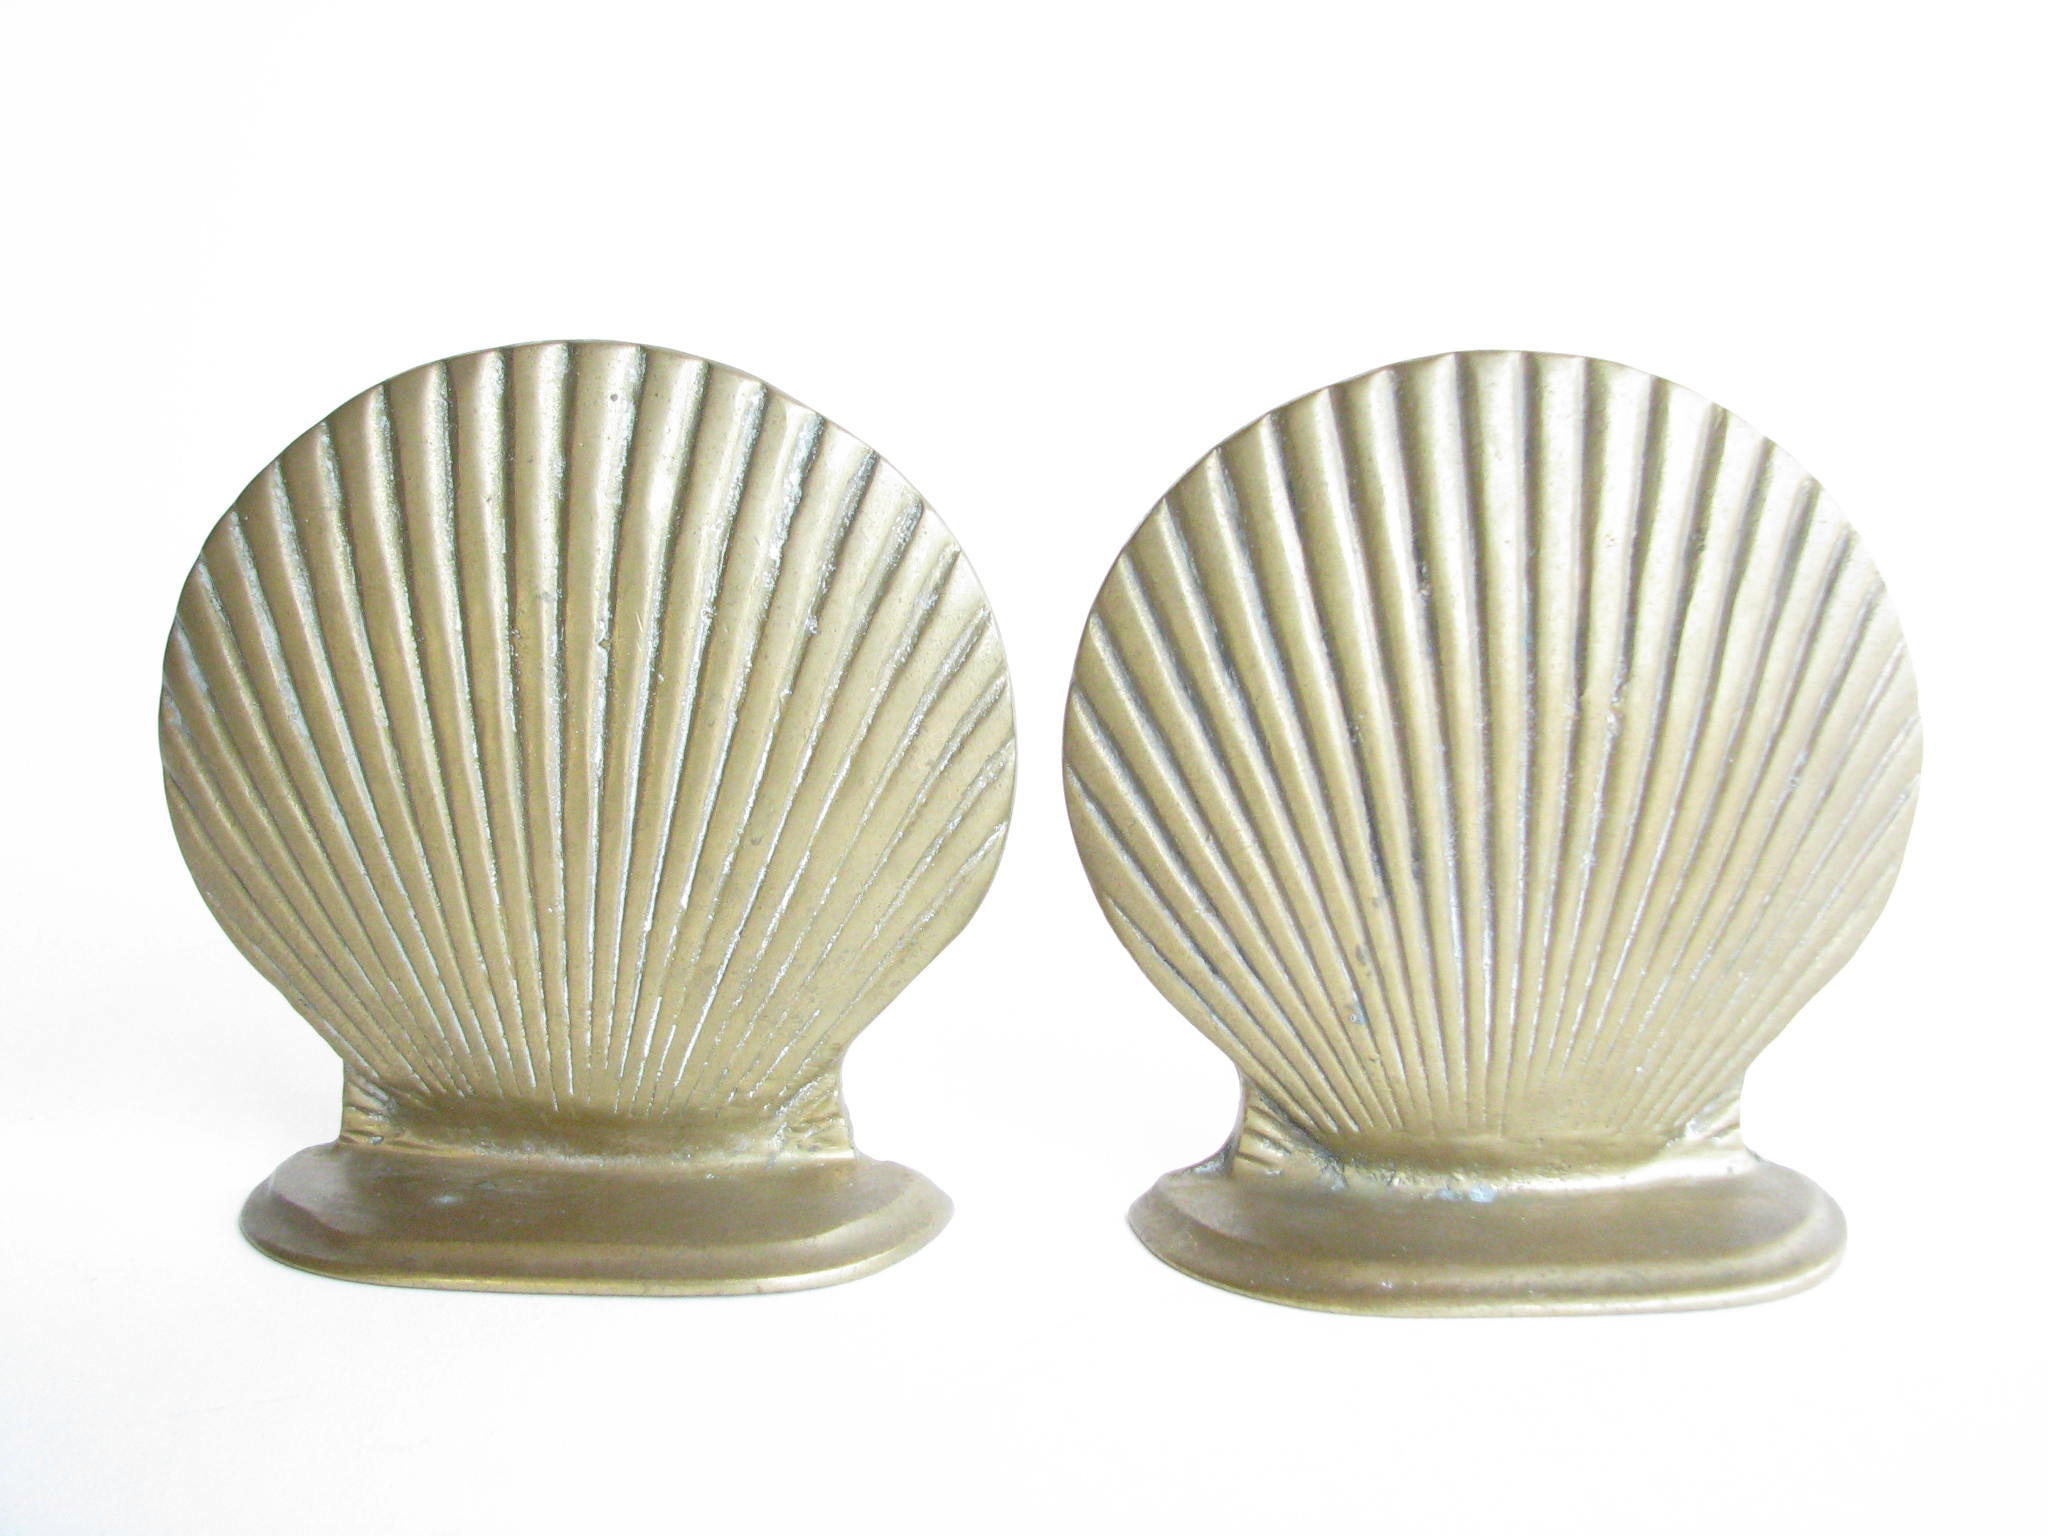 Vintage mid century modern Solid brass seashell bookends By price